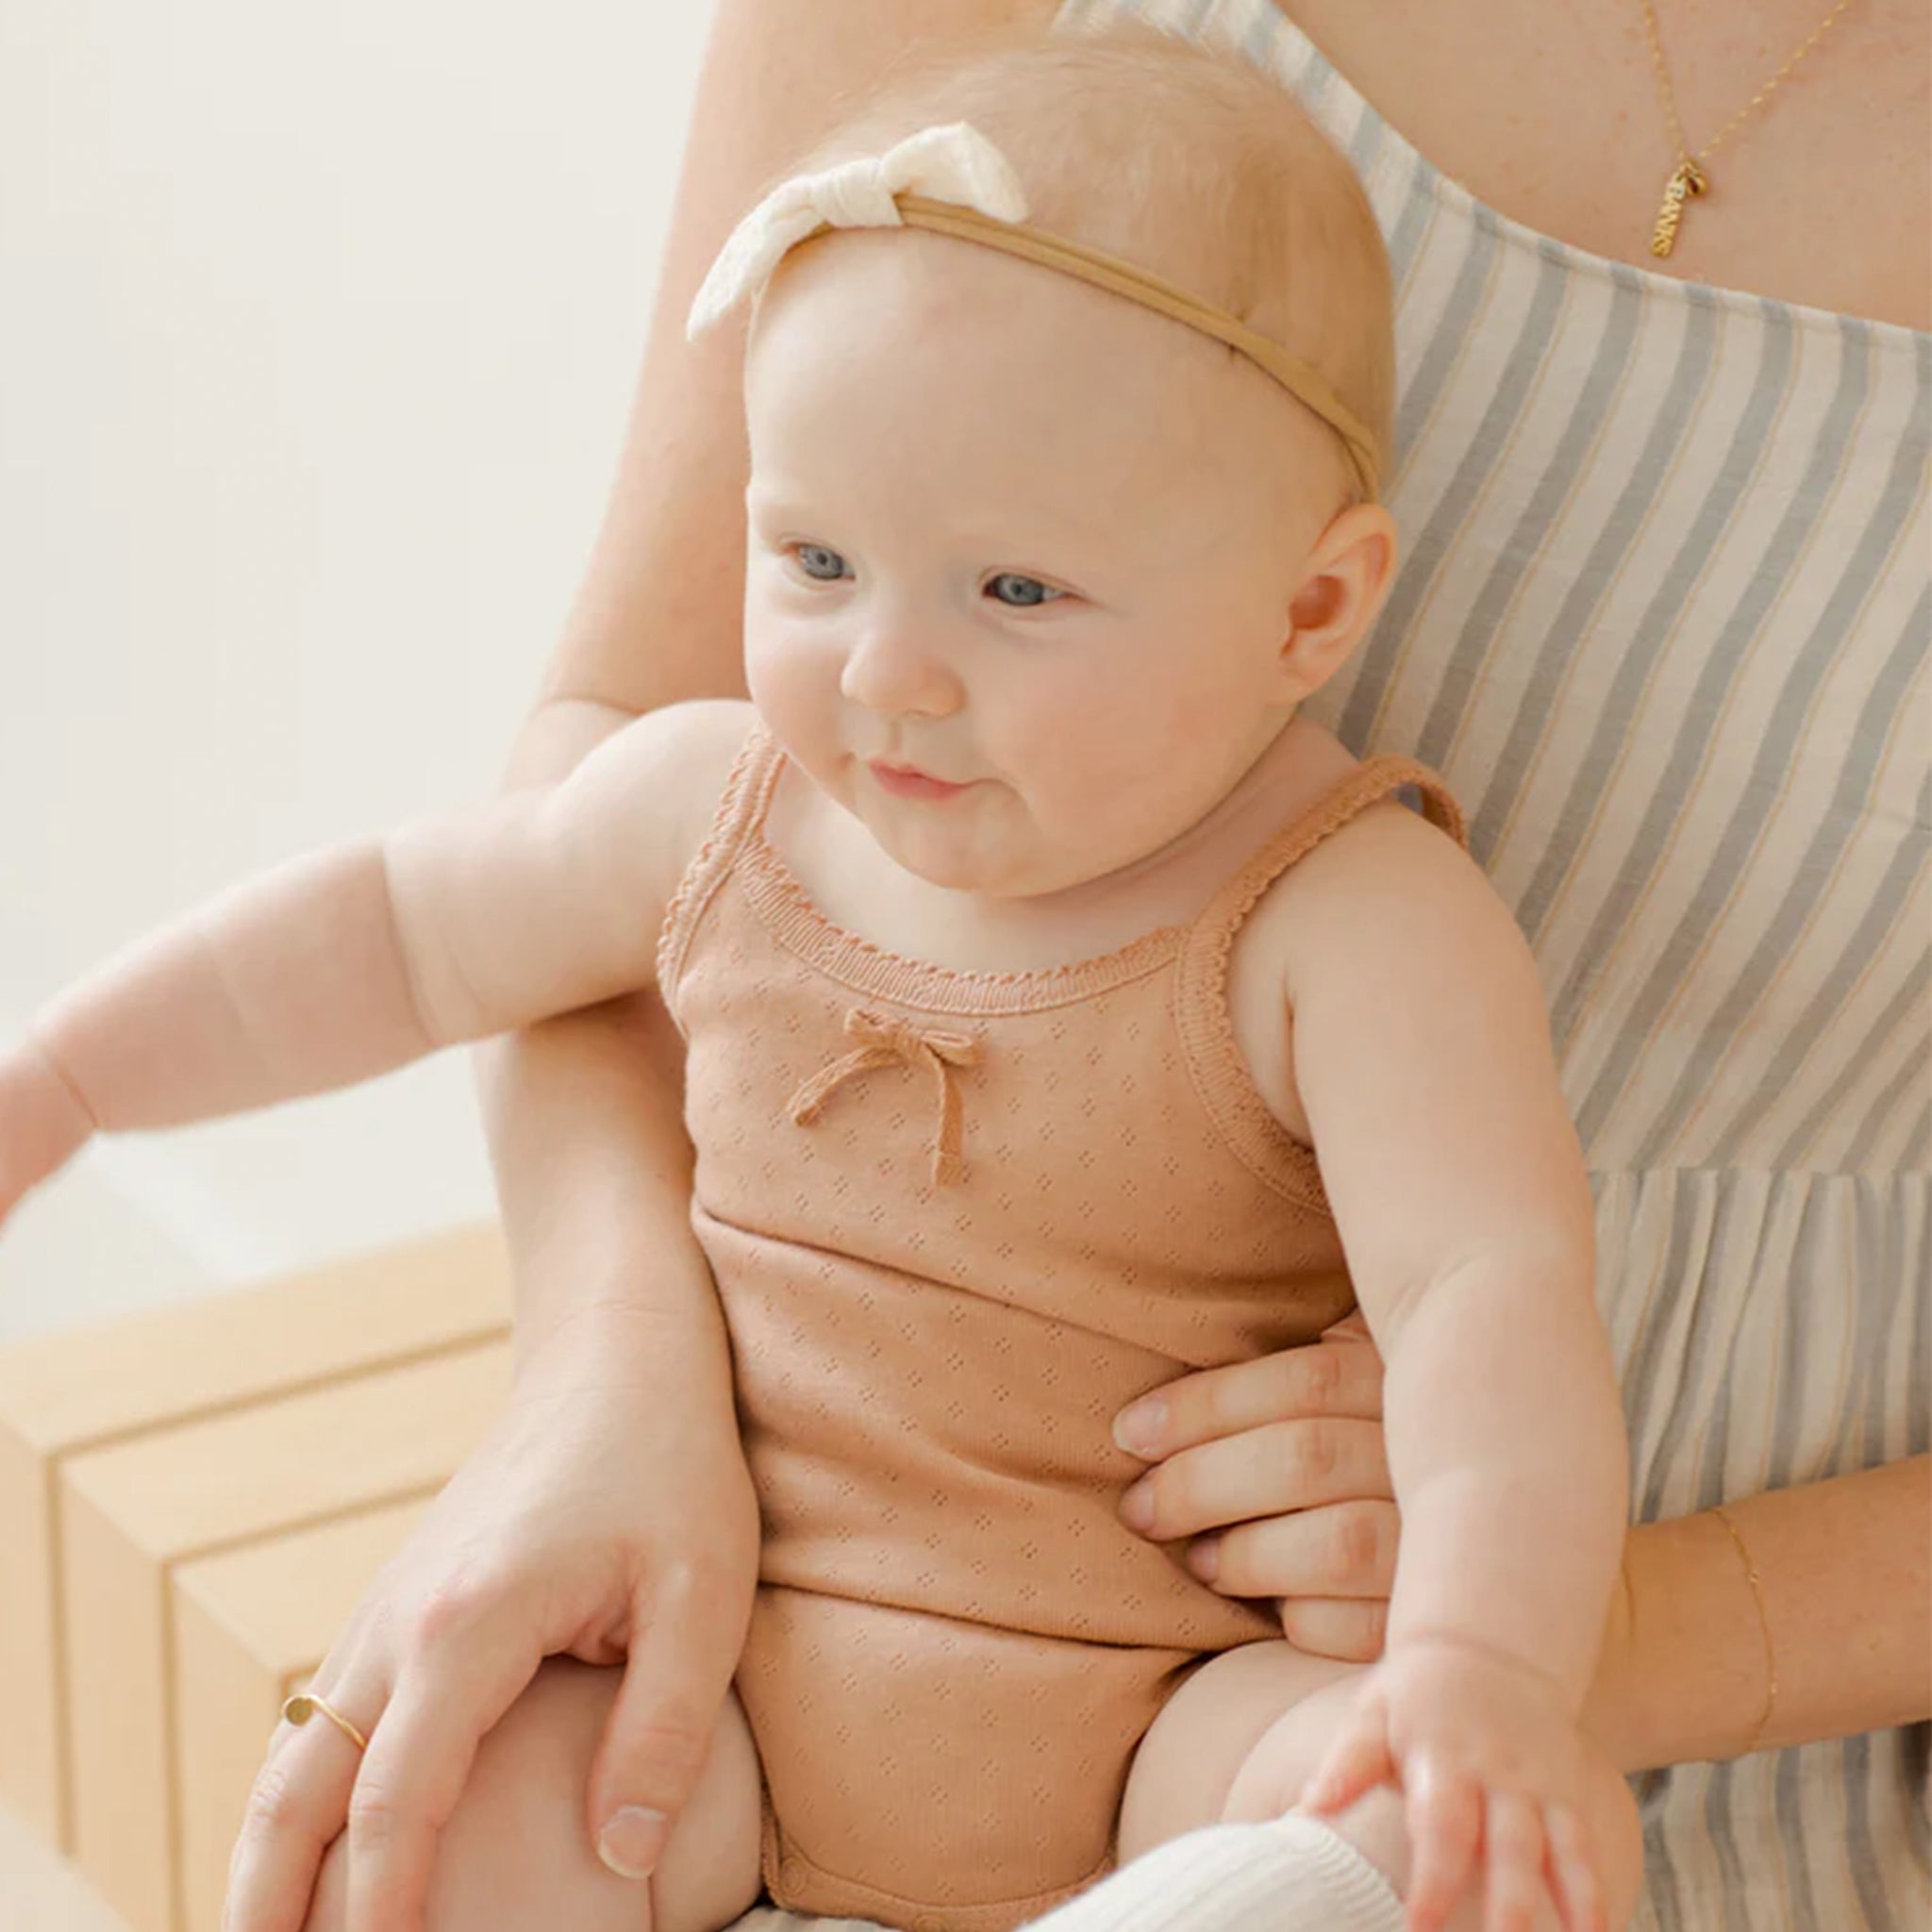 A light orange tank onesie with snap closure and a small bow detail at the top.